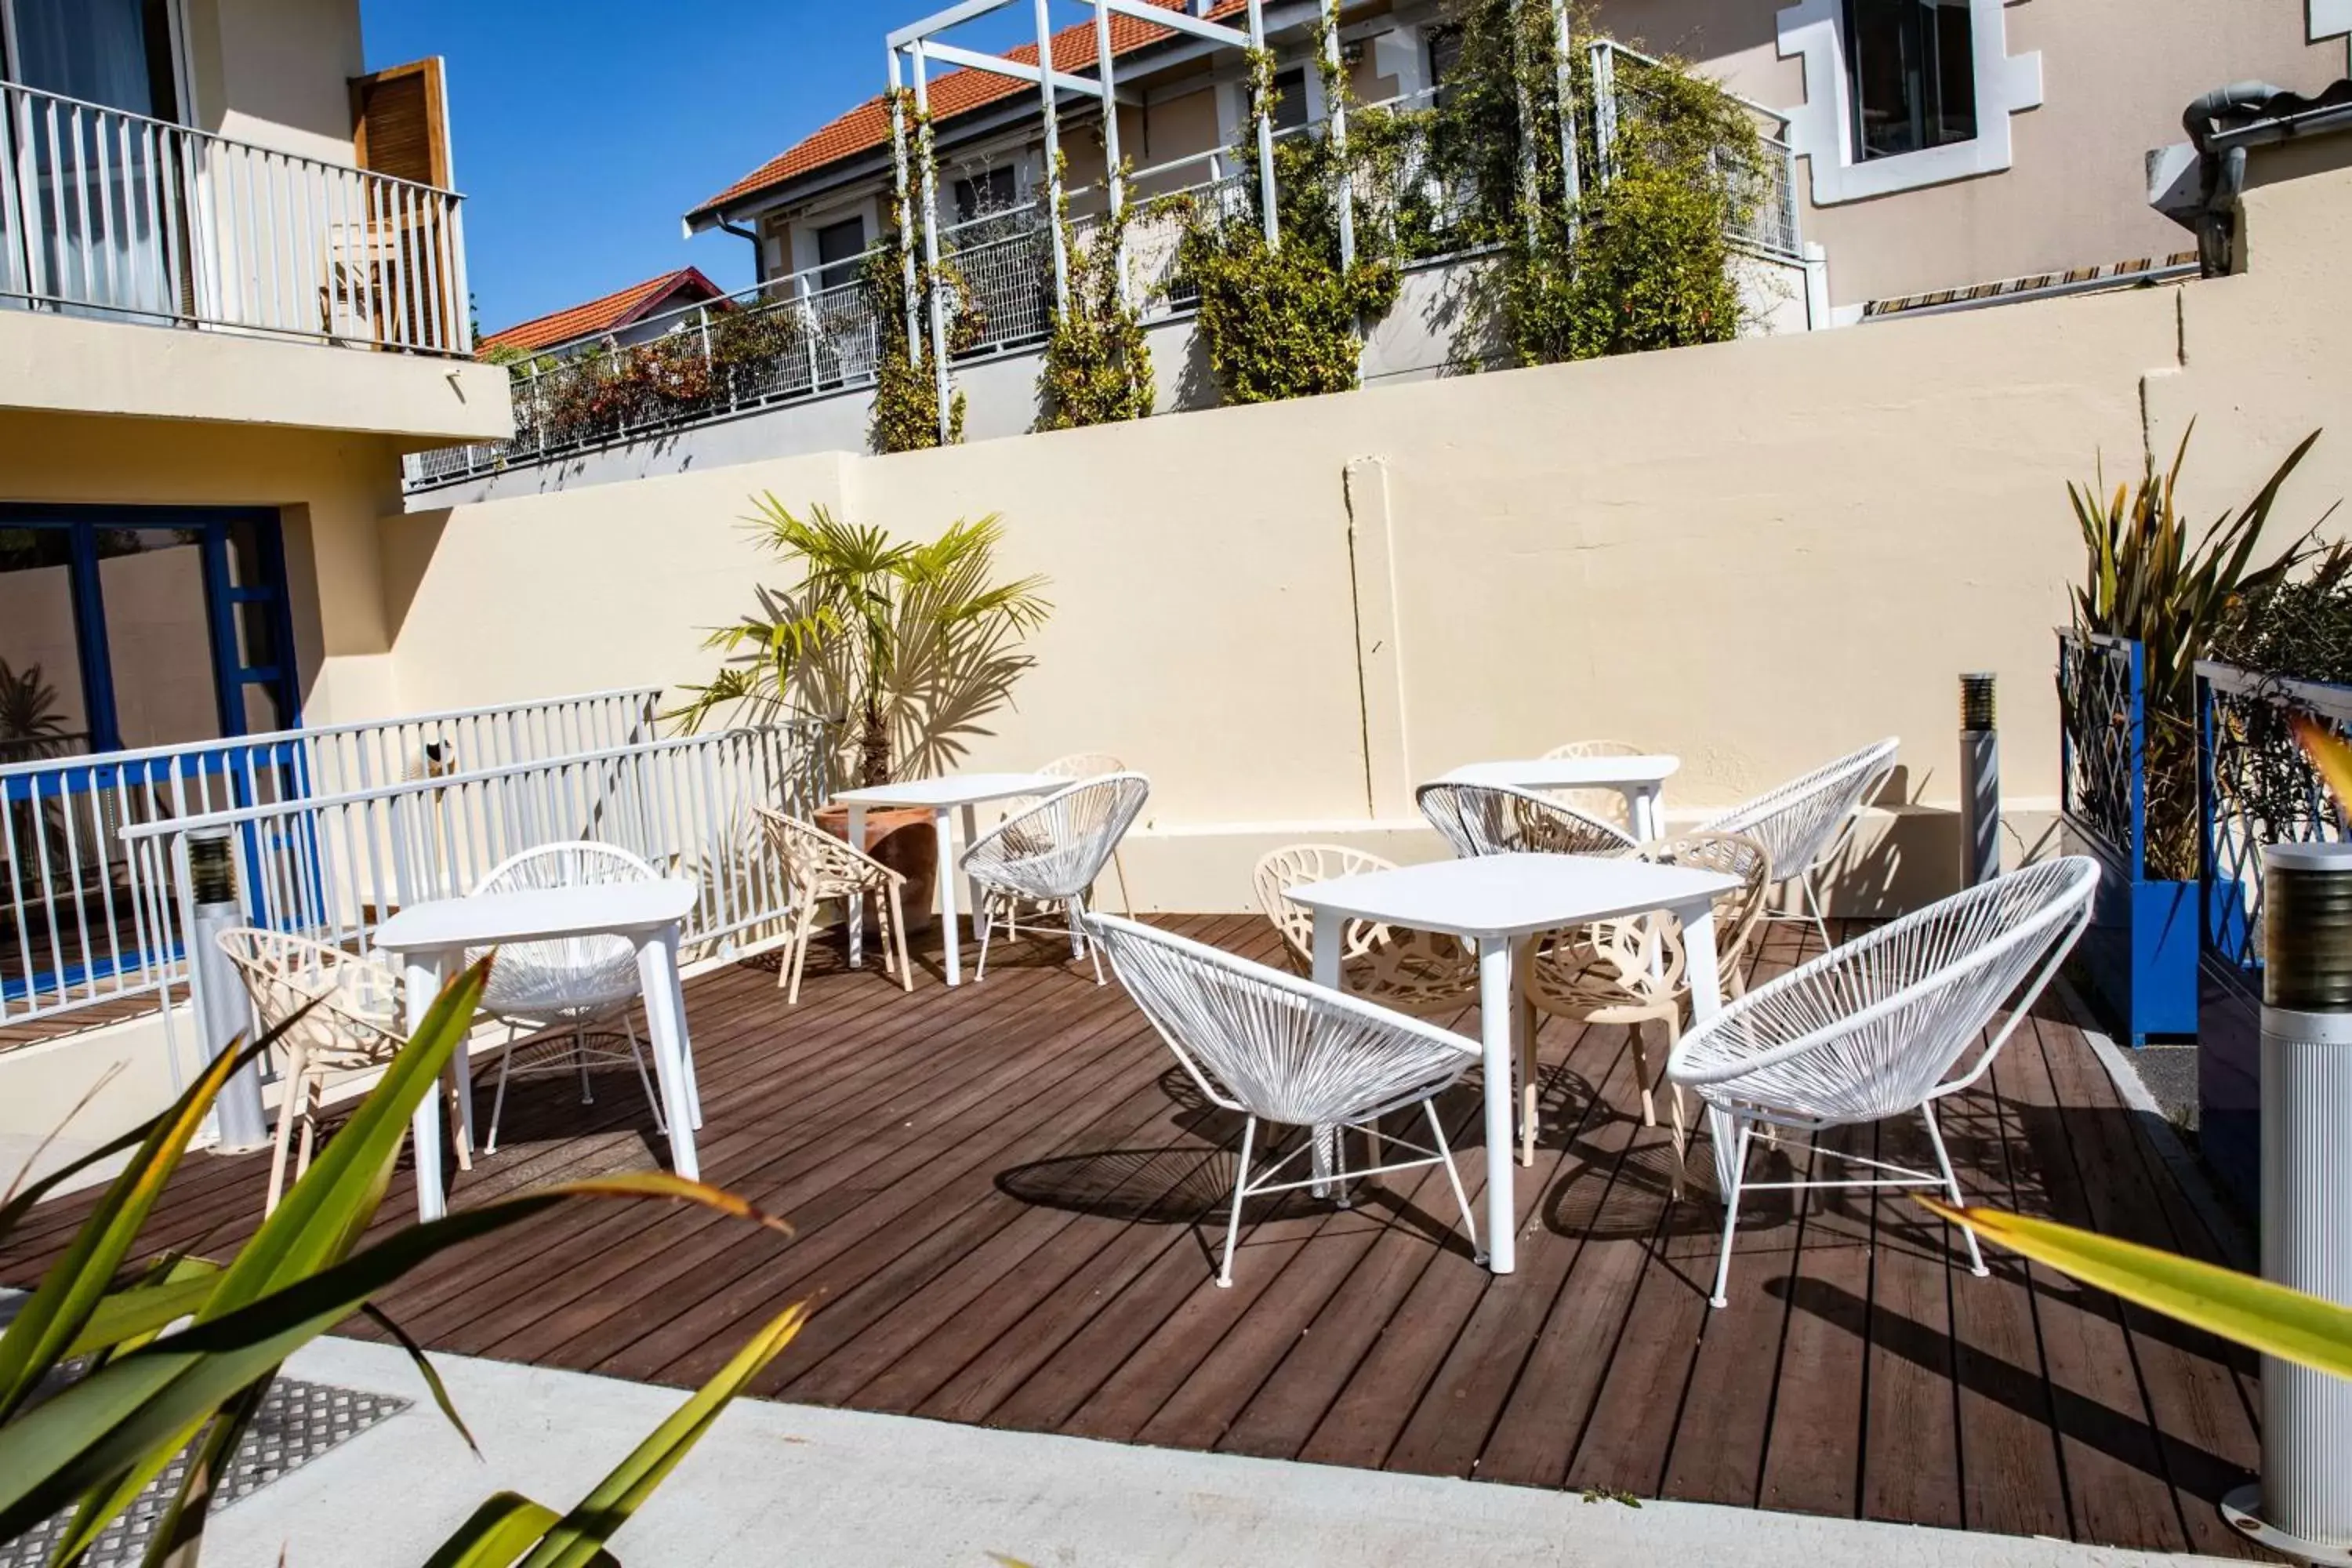 Property building in Best Western Arcachon Le Port